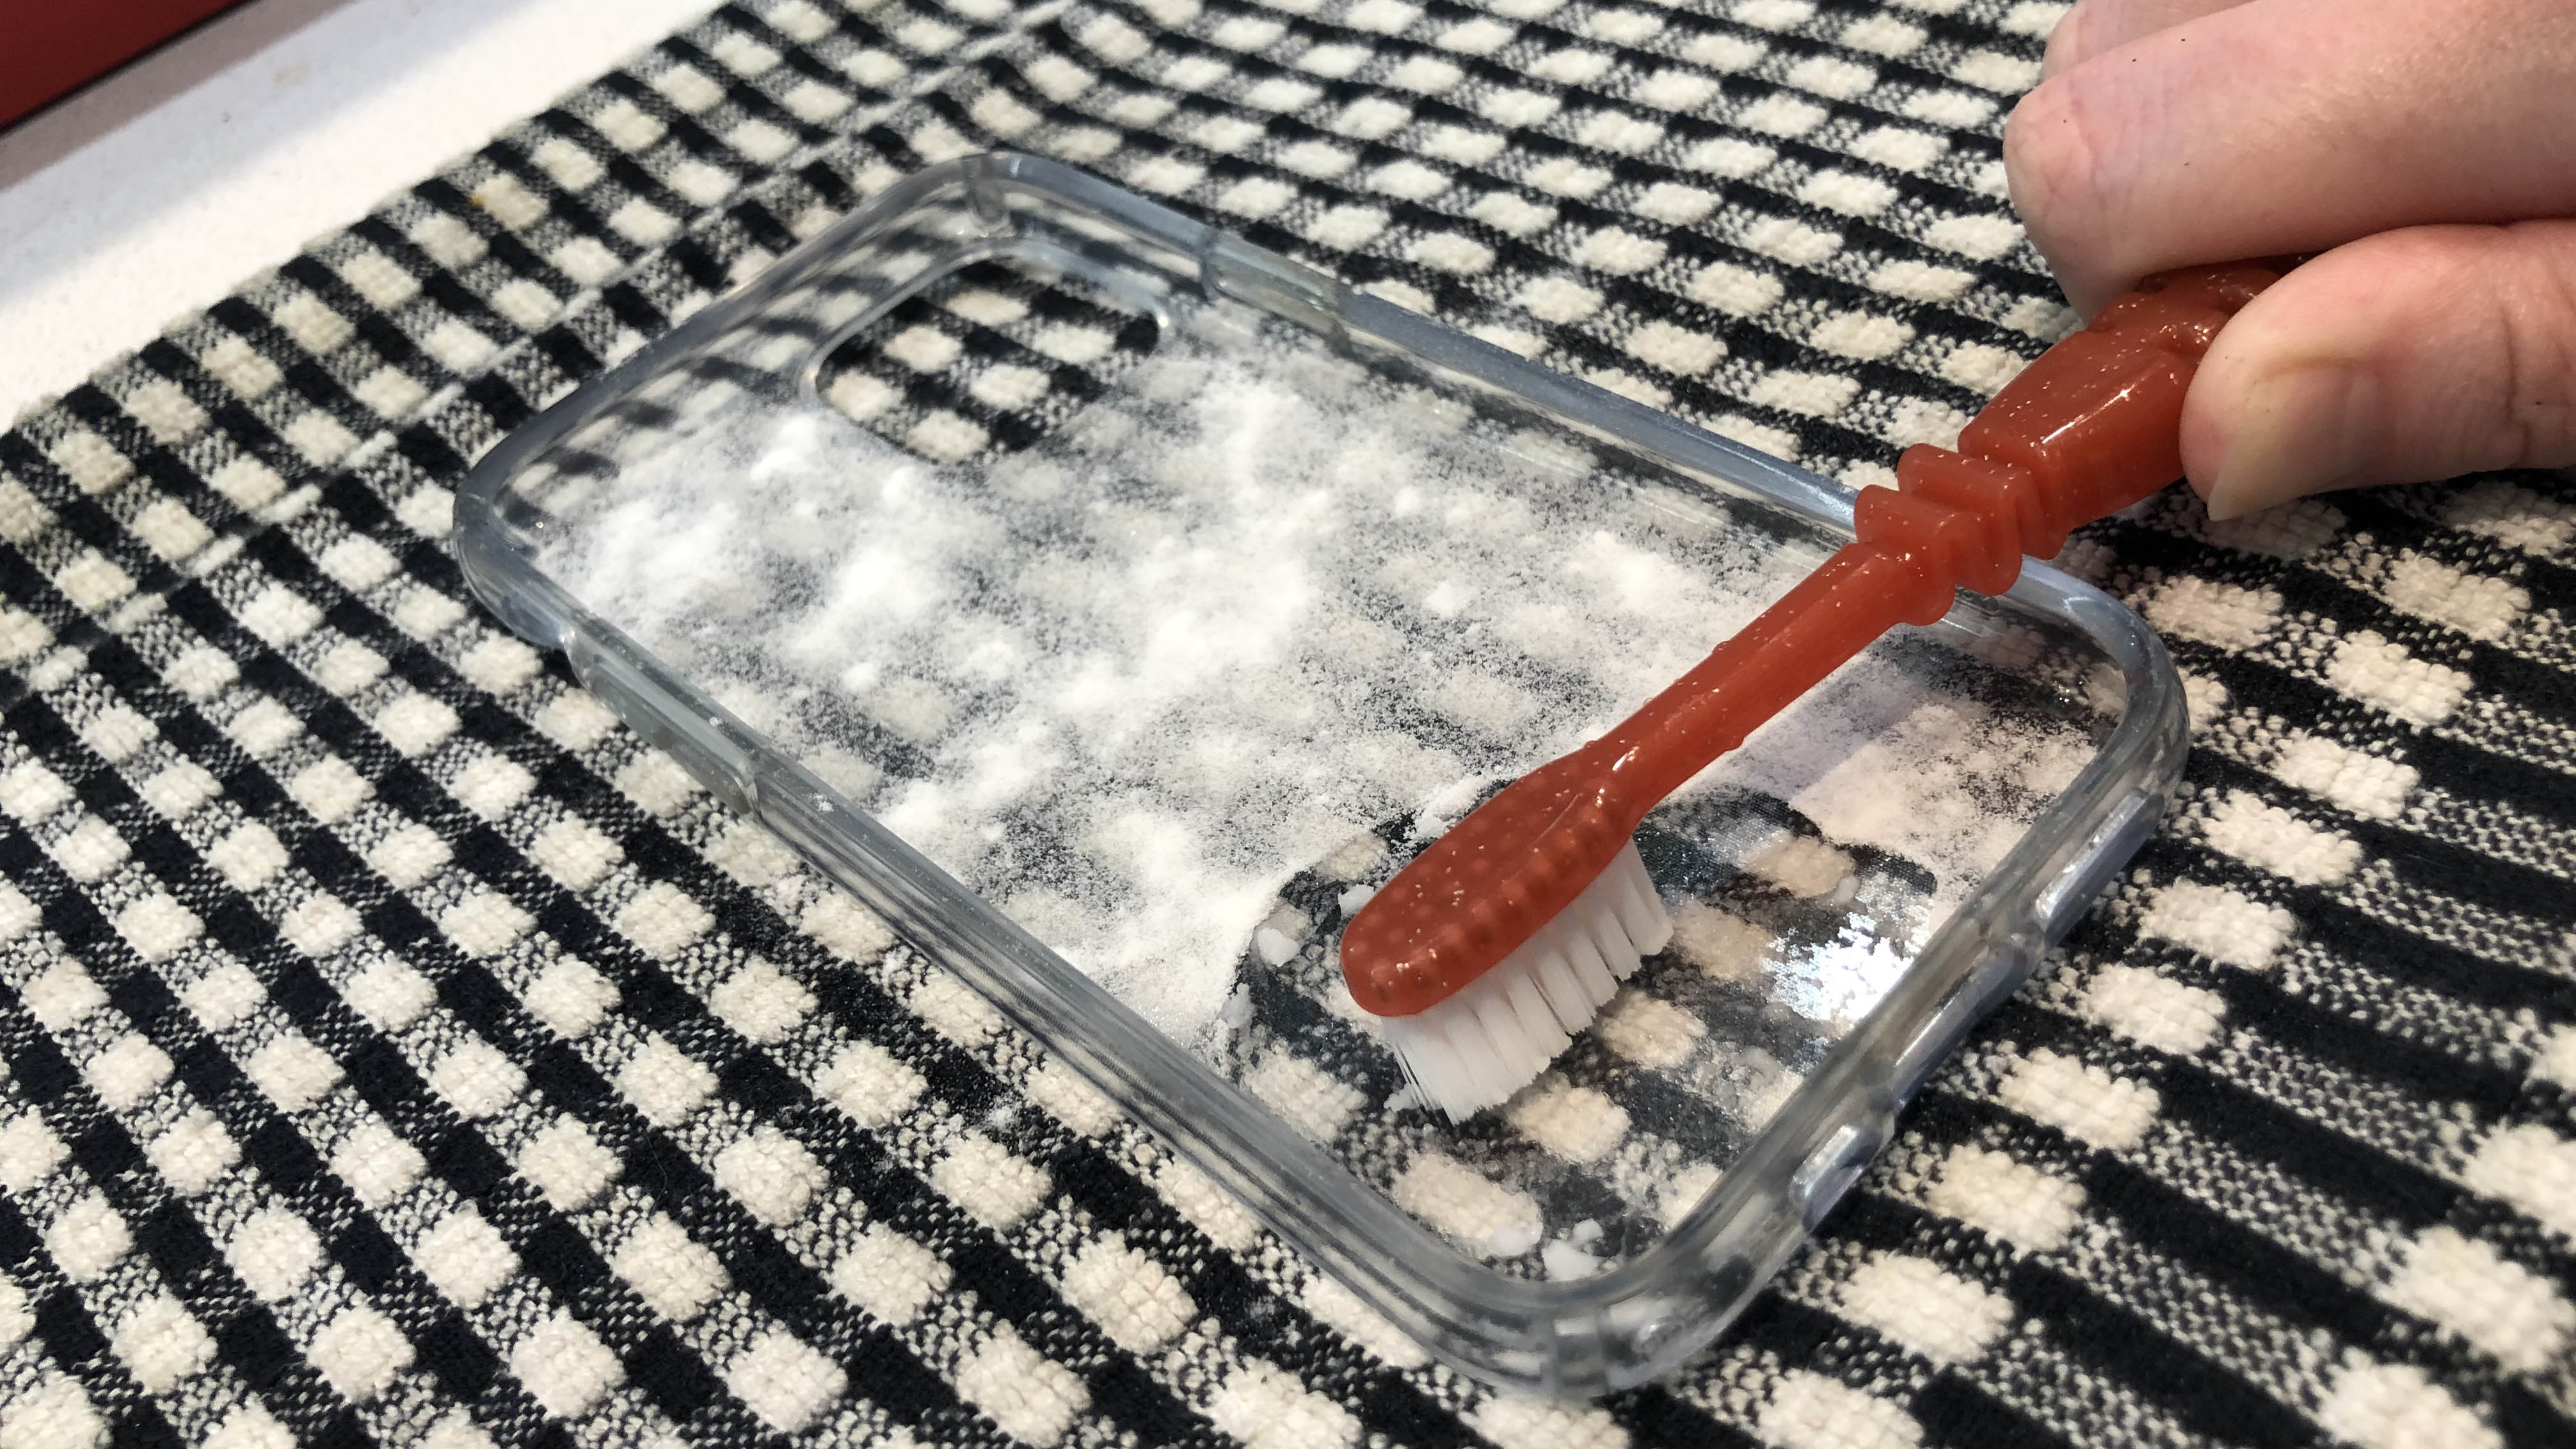 A clear phone case sitting on a towel being cleaned with baking soda and a toothbrush